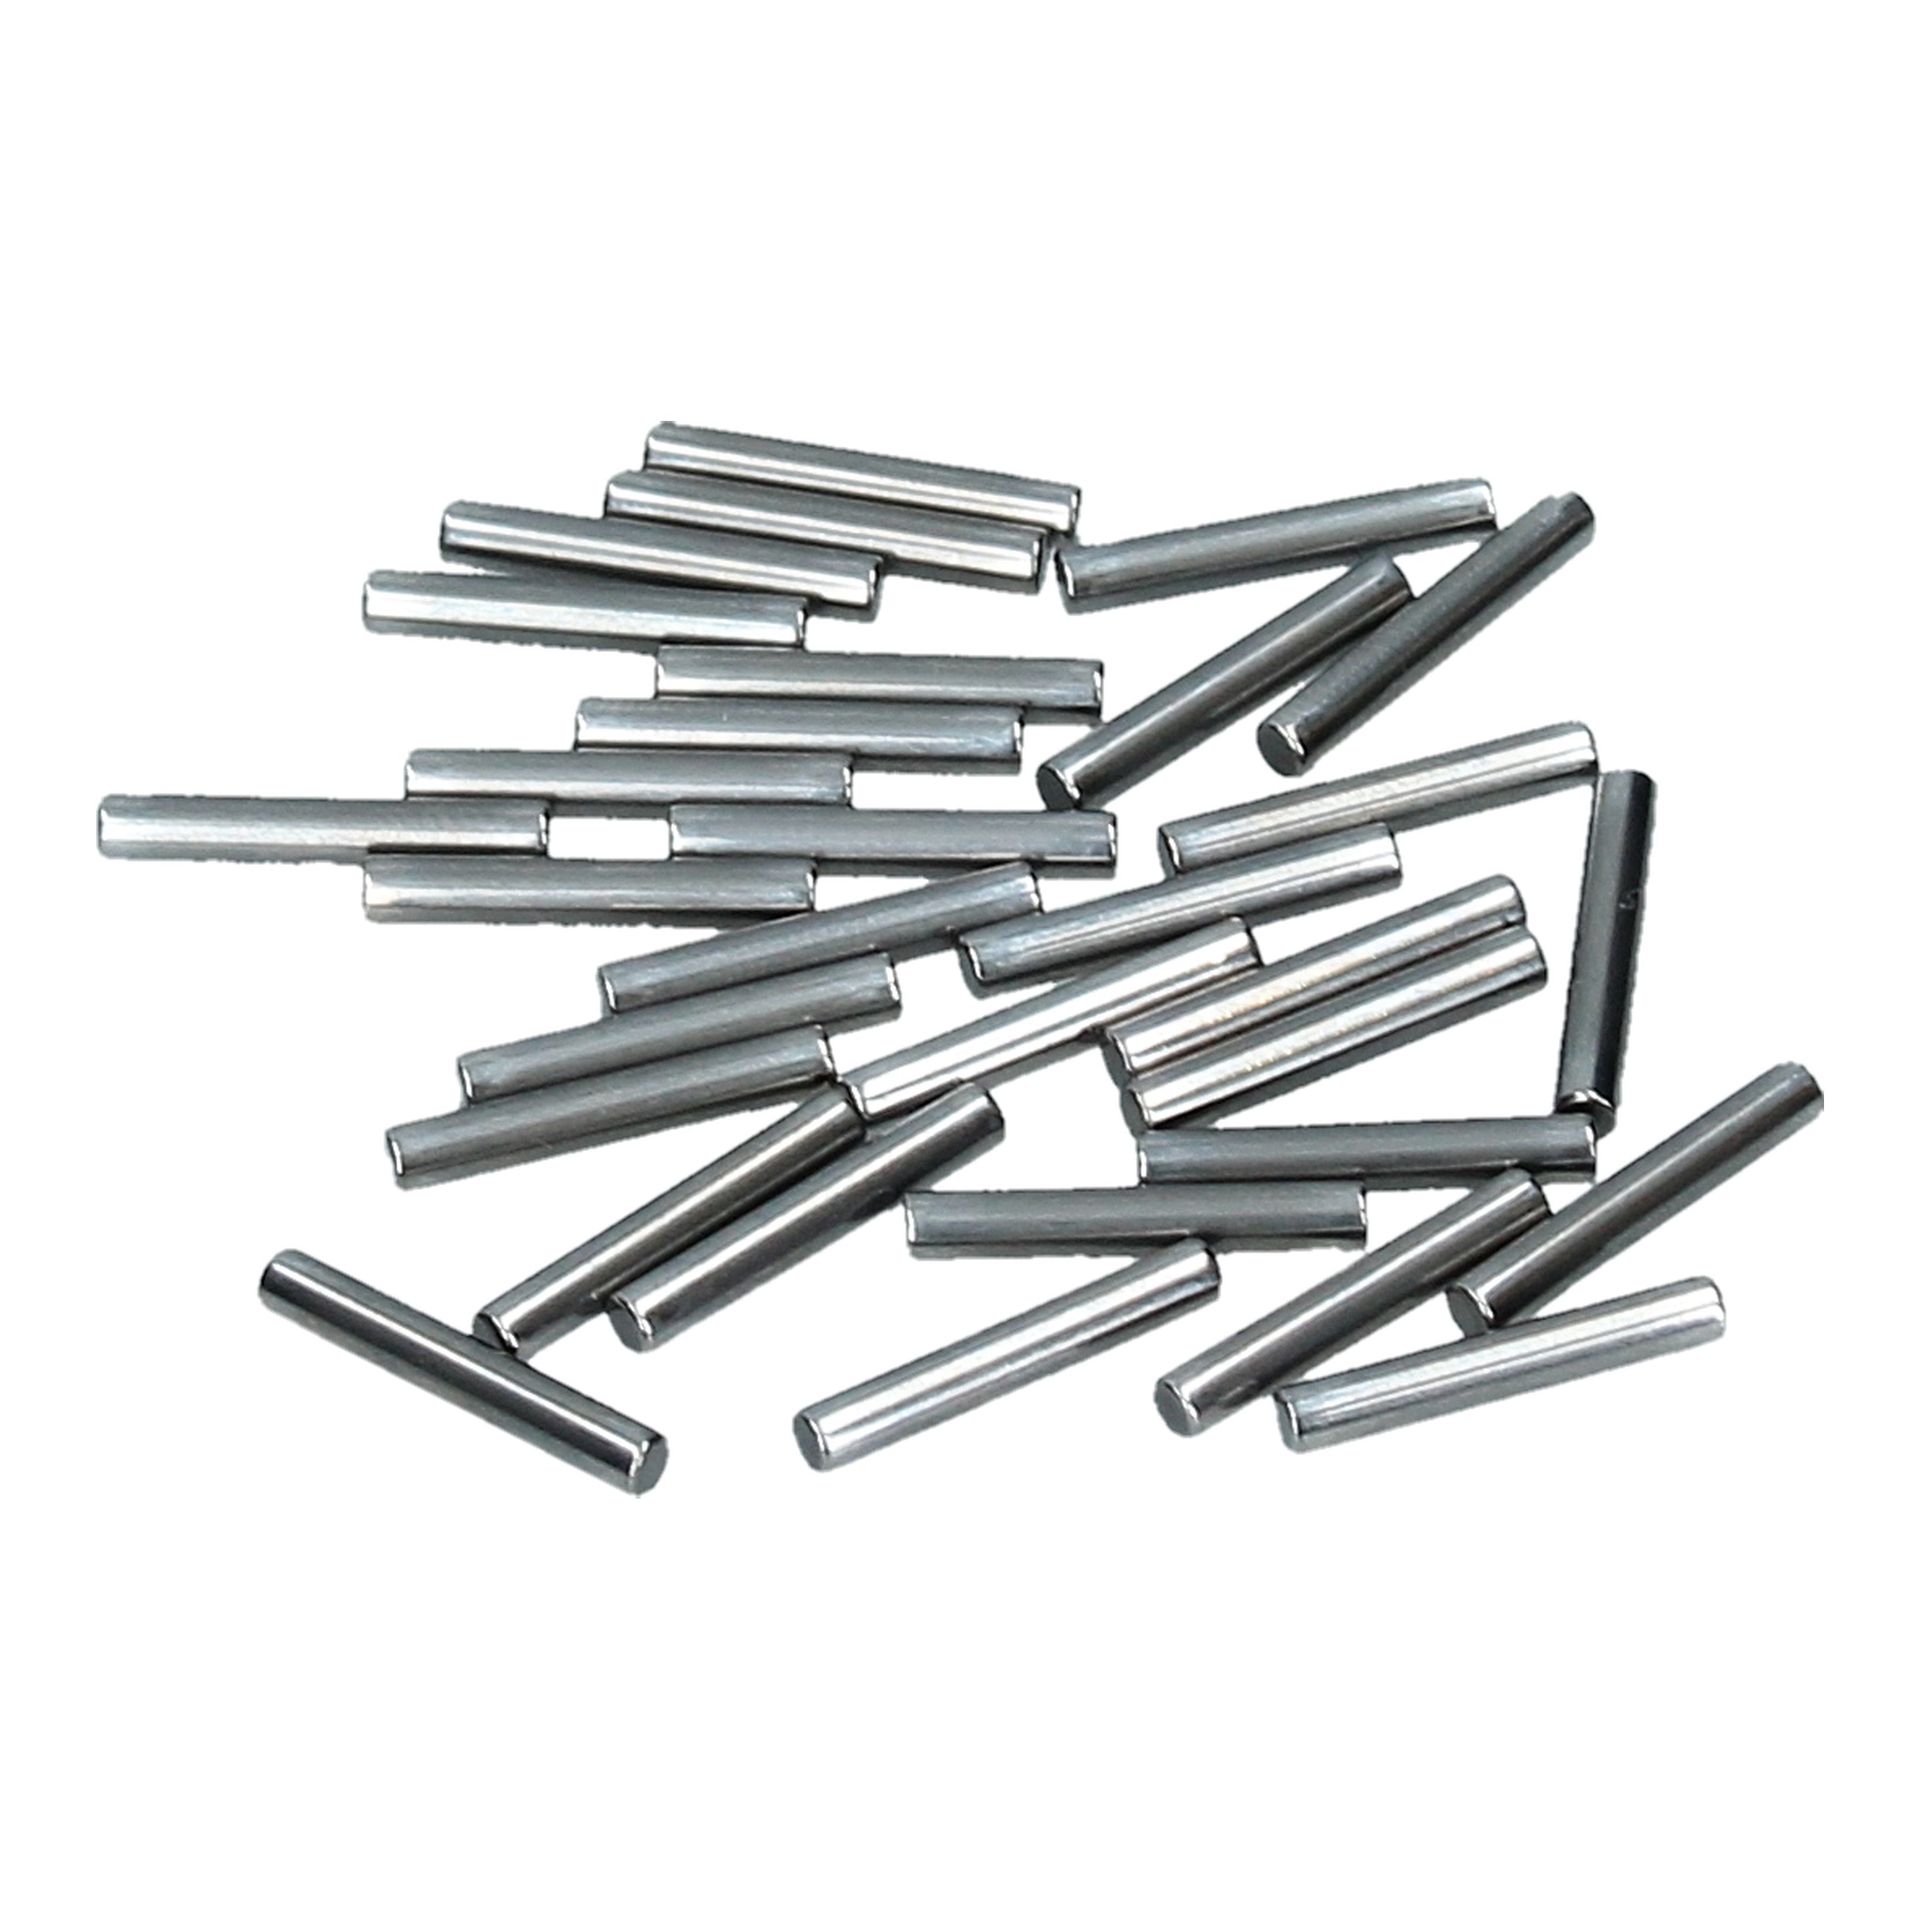 King Pin Needle Rollers